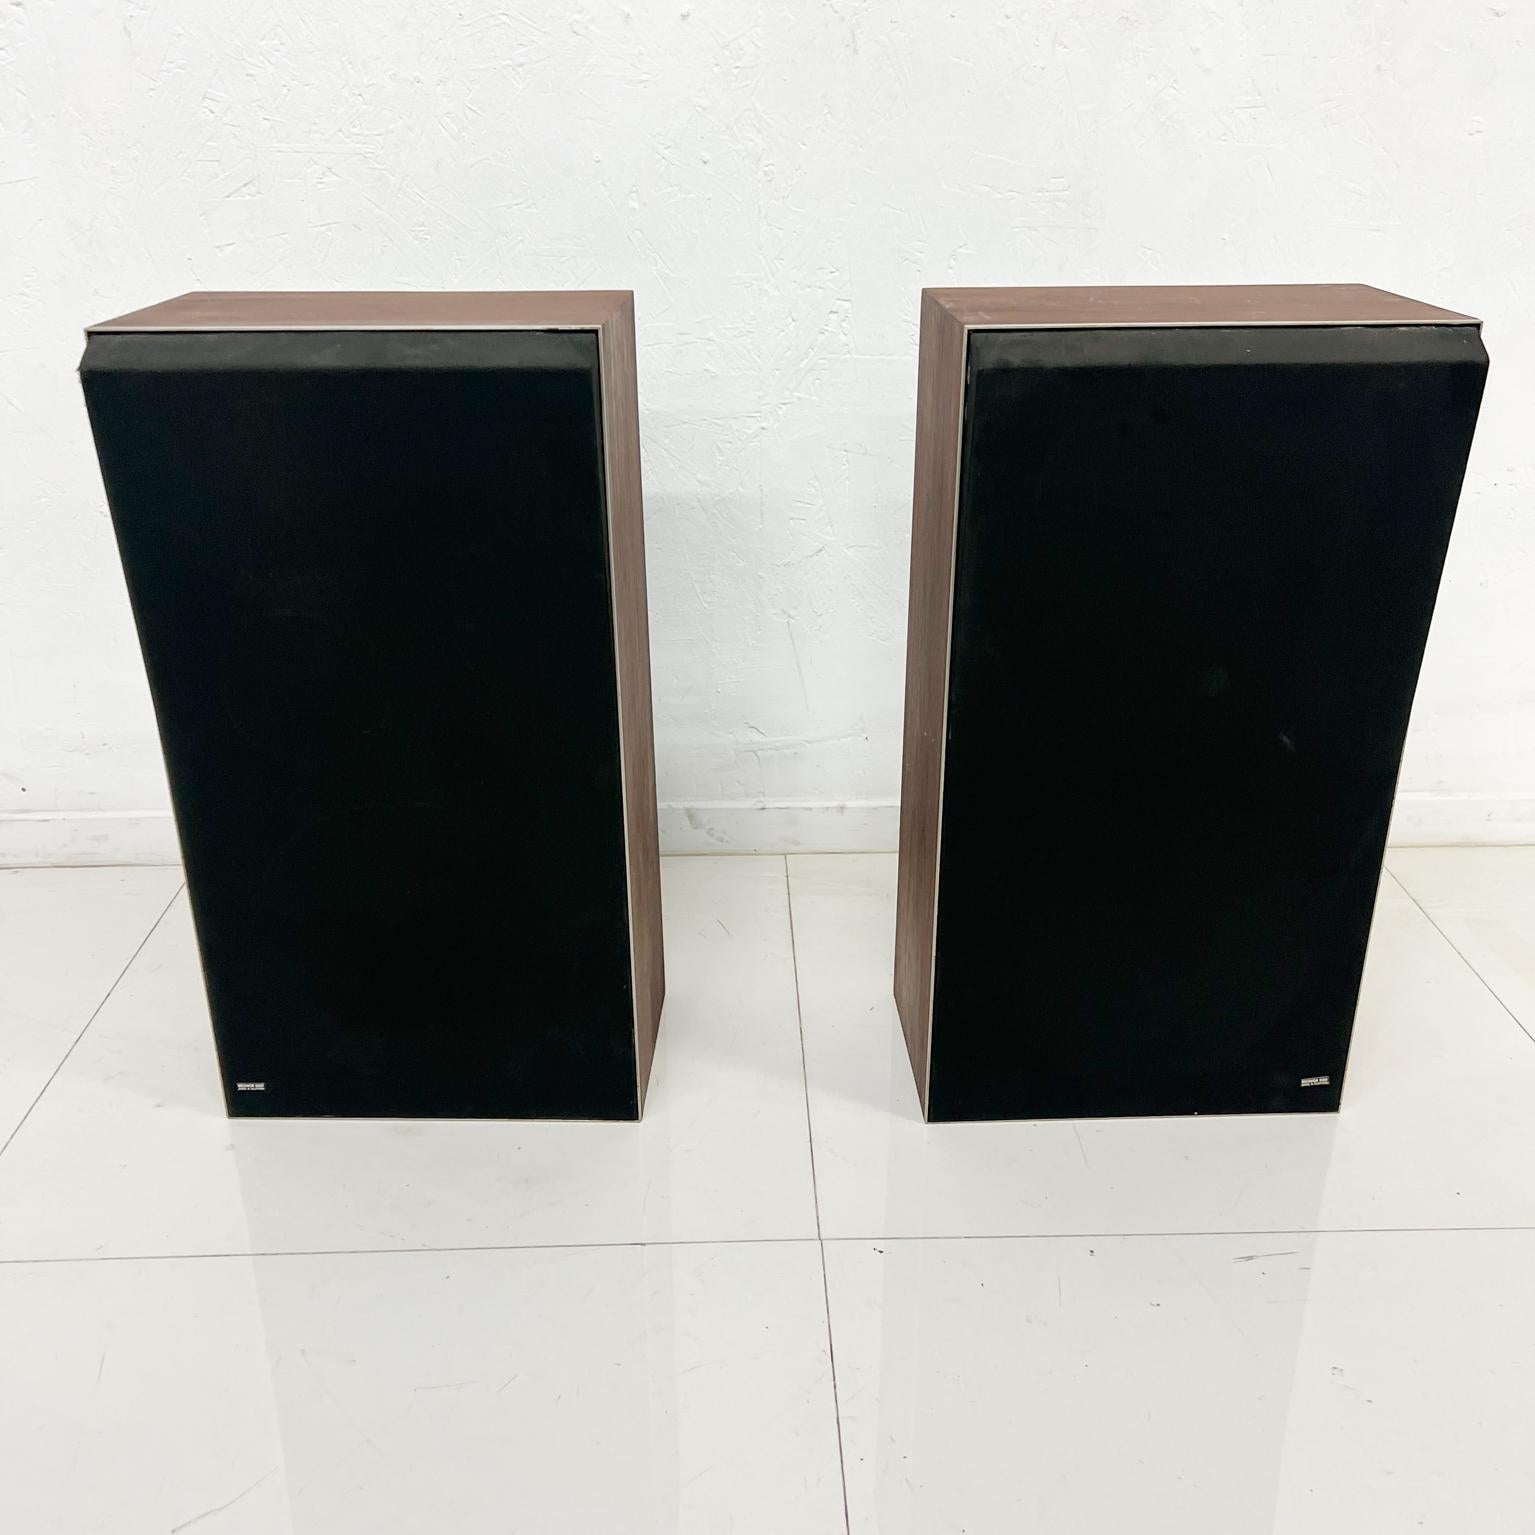 Beovox B&O Denmark pair of Speakers by Bang Olufsen Made in Denmark,
Rosewood case. Model Beovox. Specs are on the backside.
Measures: 23 H x 12.5 W x 8.25 D.
Preowned original vintage condition.
See images provided.
 